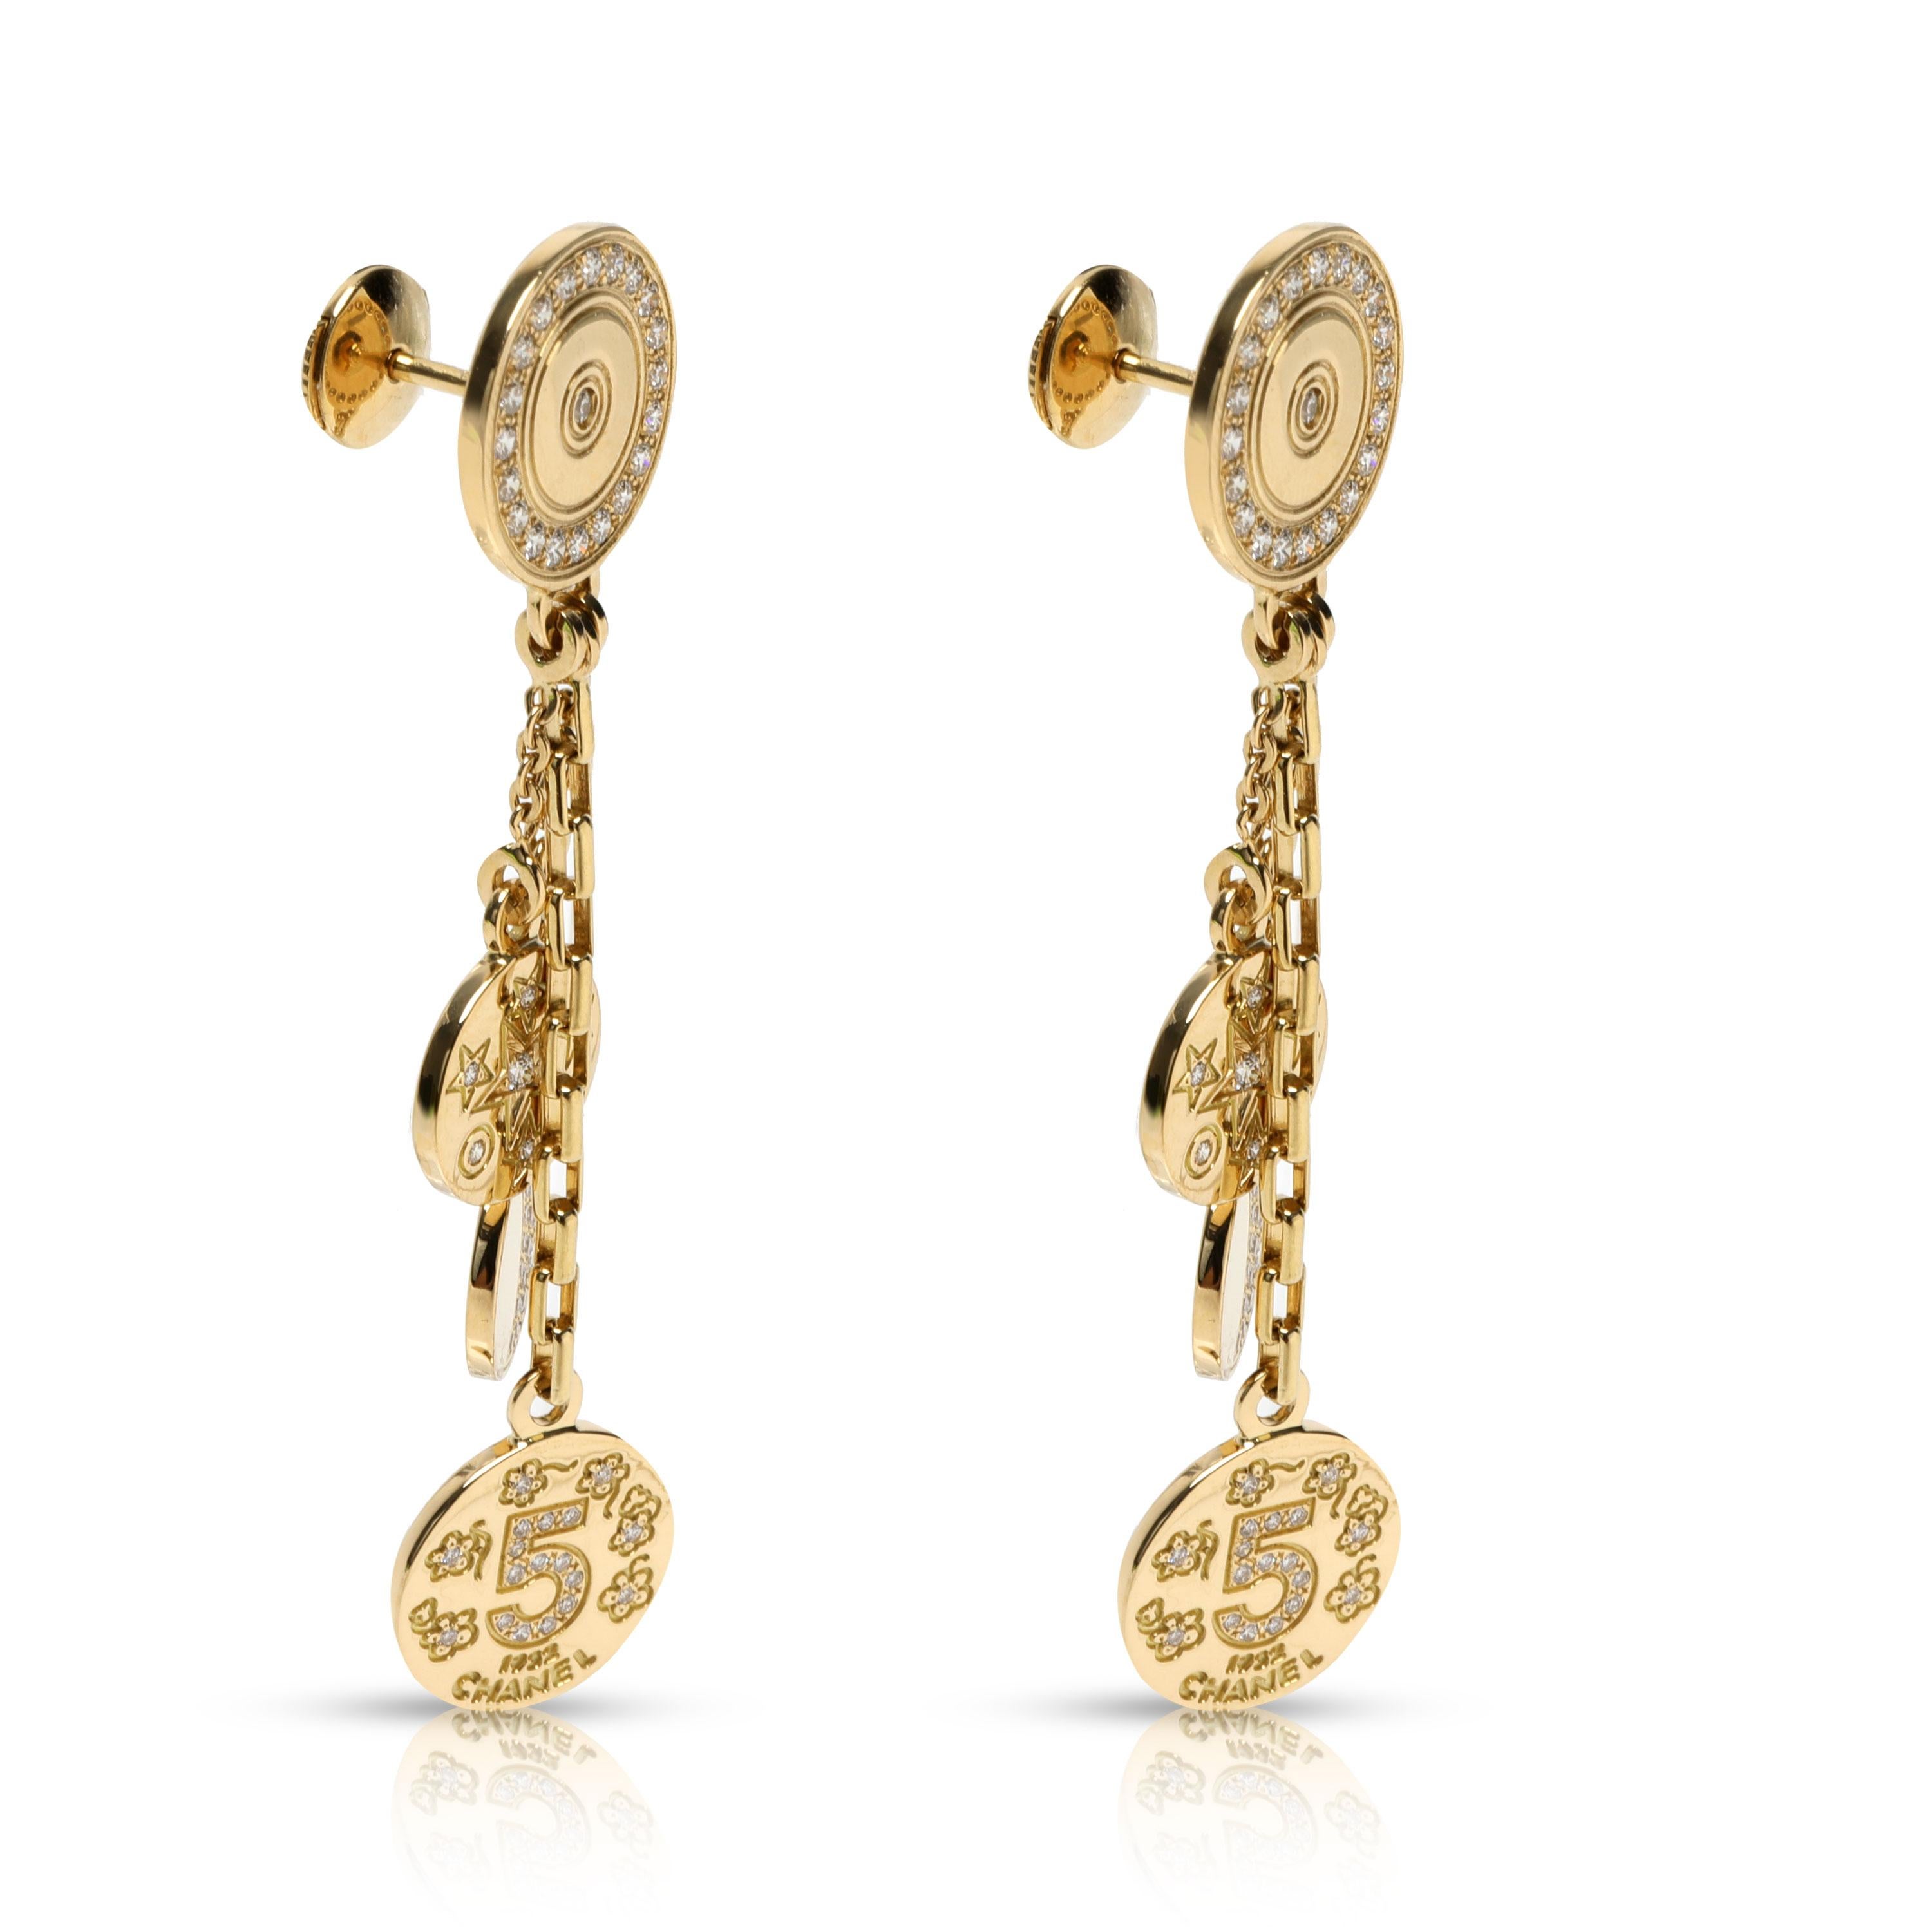 
Chanel Comete Diamond Earrings in 18K Yellow Gold 1.00 CTW

SKU: 105222

Condition Description: Retails for 19,500 USD. In excellent condition and recently polished.
Brand: Chanel
Collection/Series: Comete
Metal Type: Yellow Gold
Metal Purity: